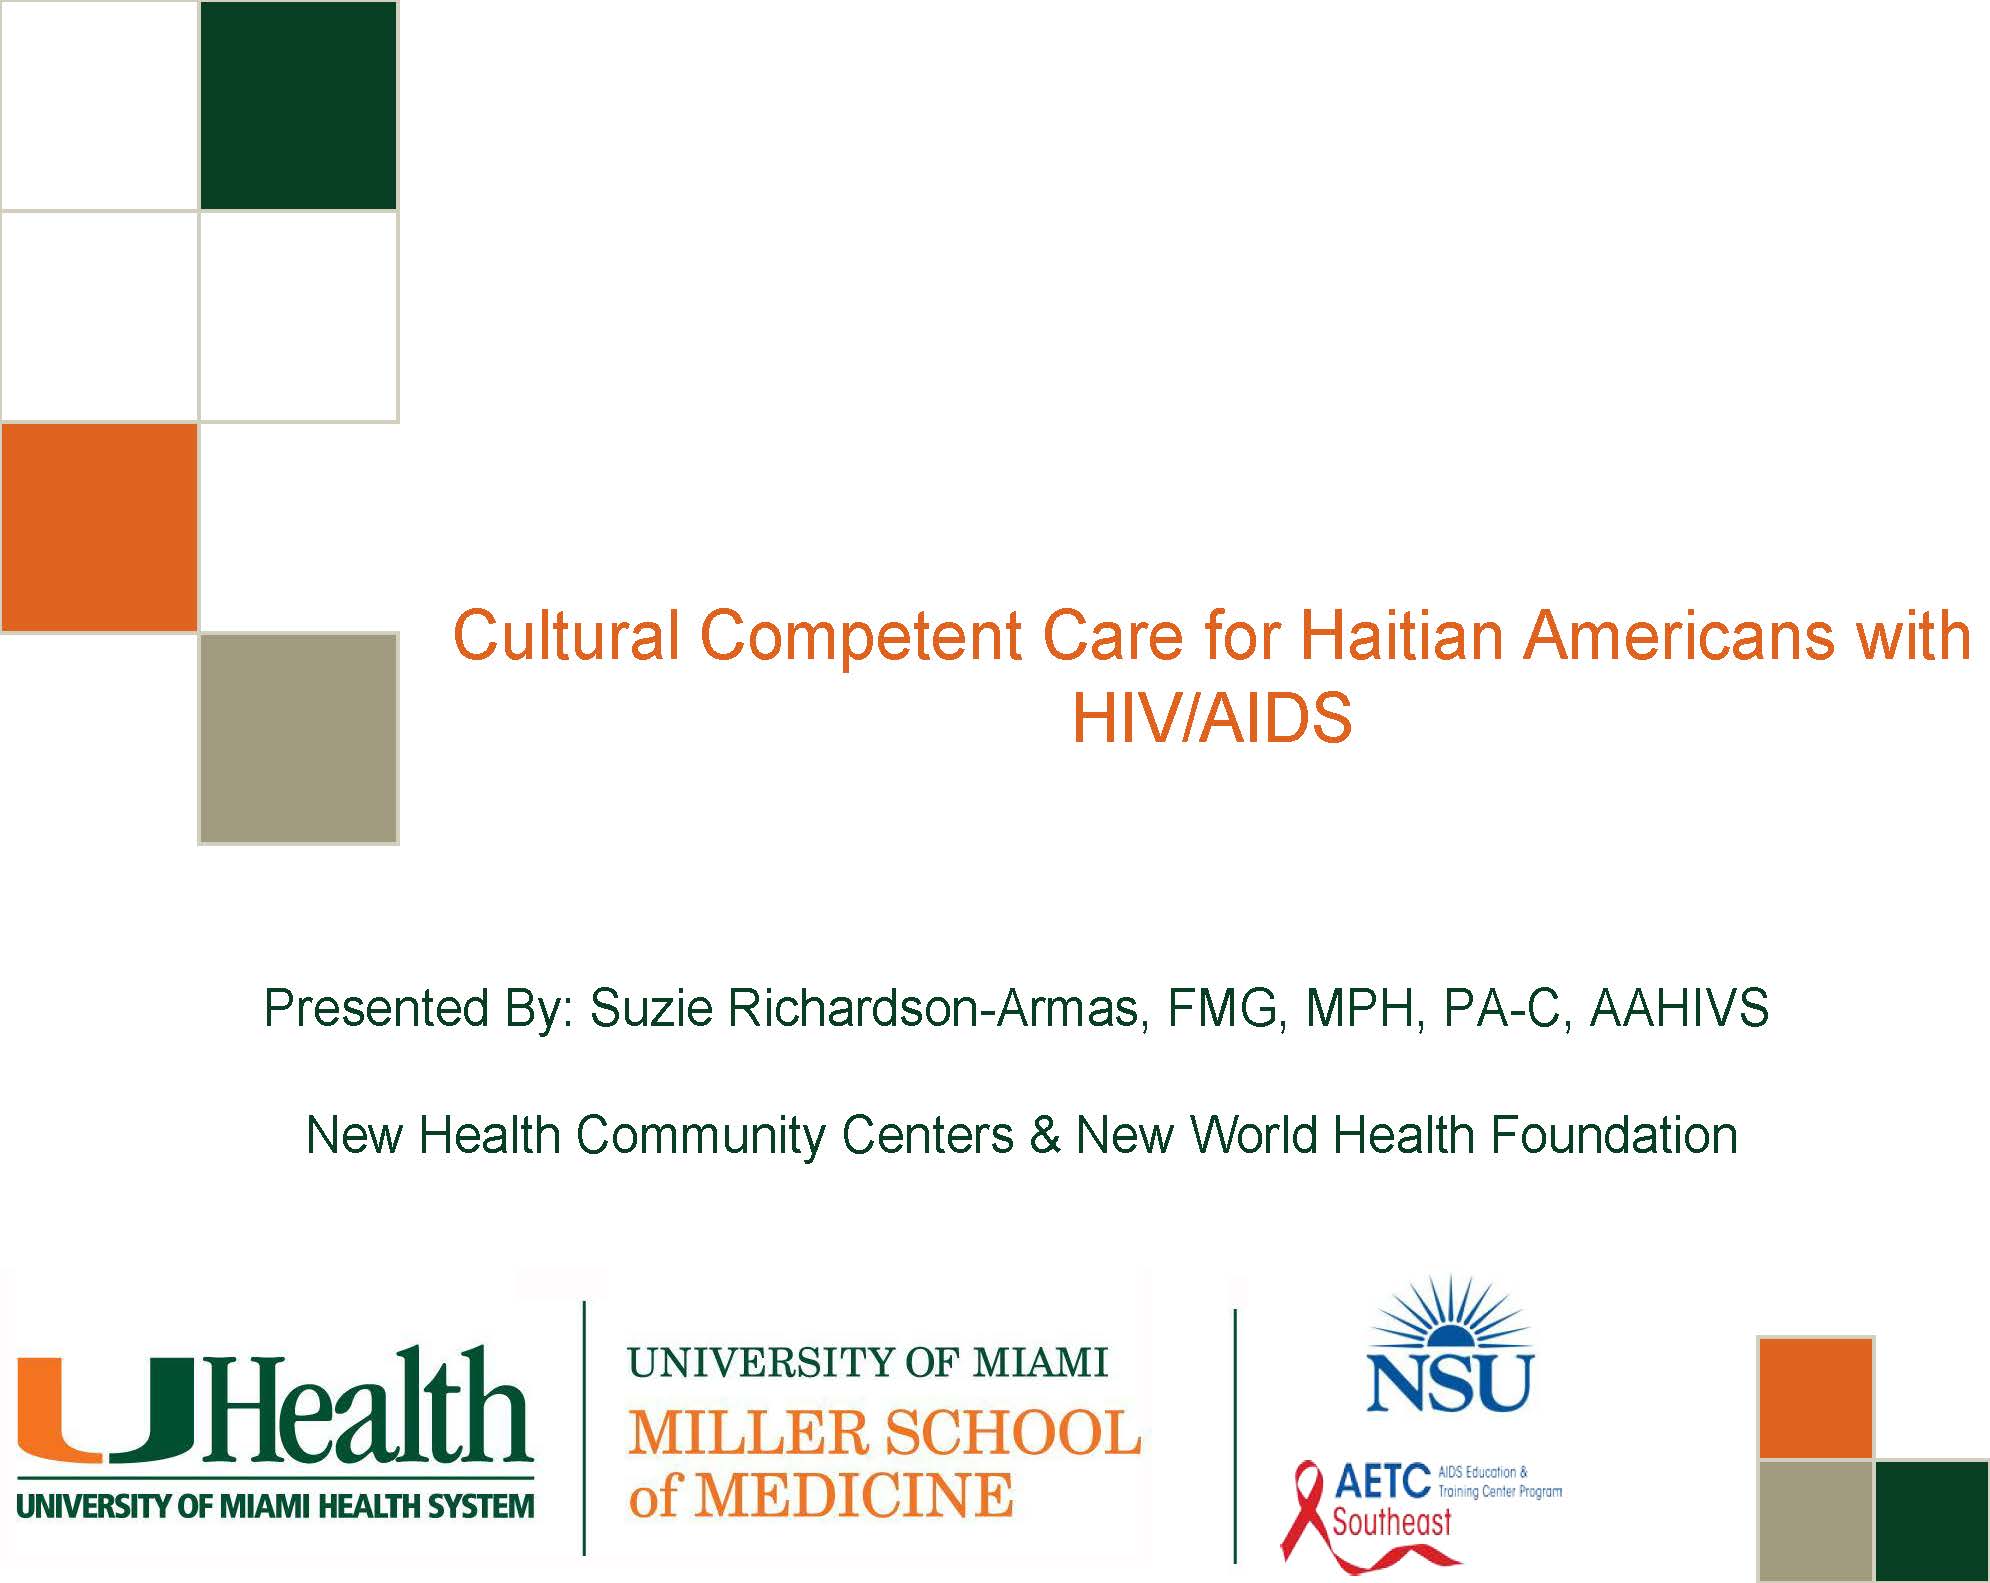 Cultural Competent Care for Haitian Americans with HIV